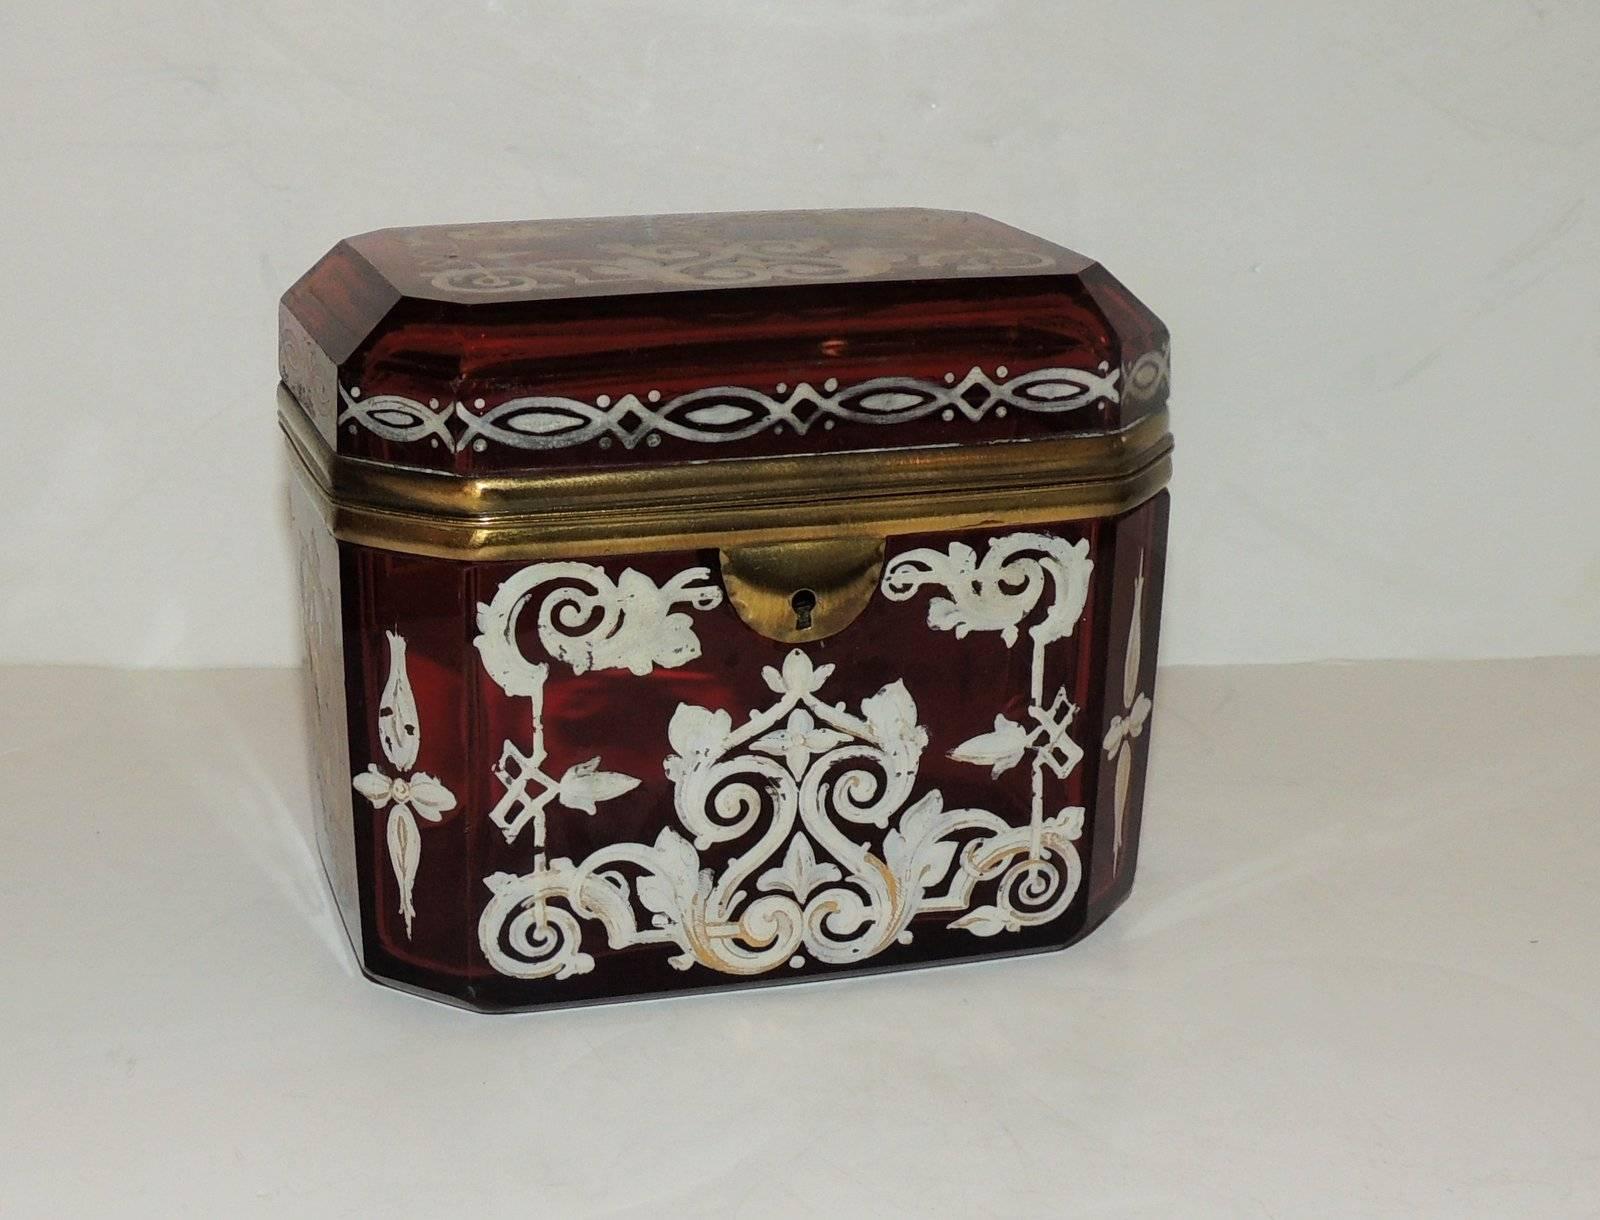 Beautiful rich ruby glass crystal is delicately hand-painted with scroll and floral elements accented with gilt. The sides are a beveled edge which adds to the look of this antique box casket. 

Measures: 4.75" W x 3.5" D x 4" H.